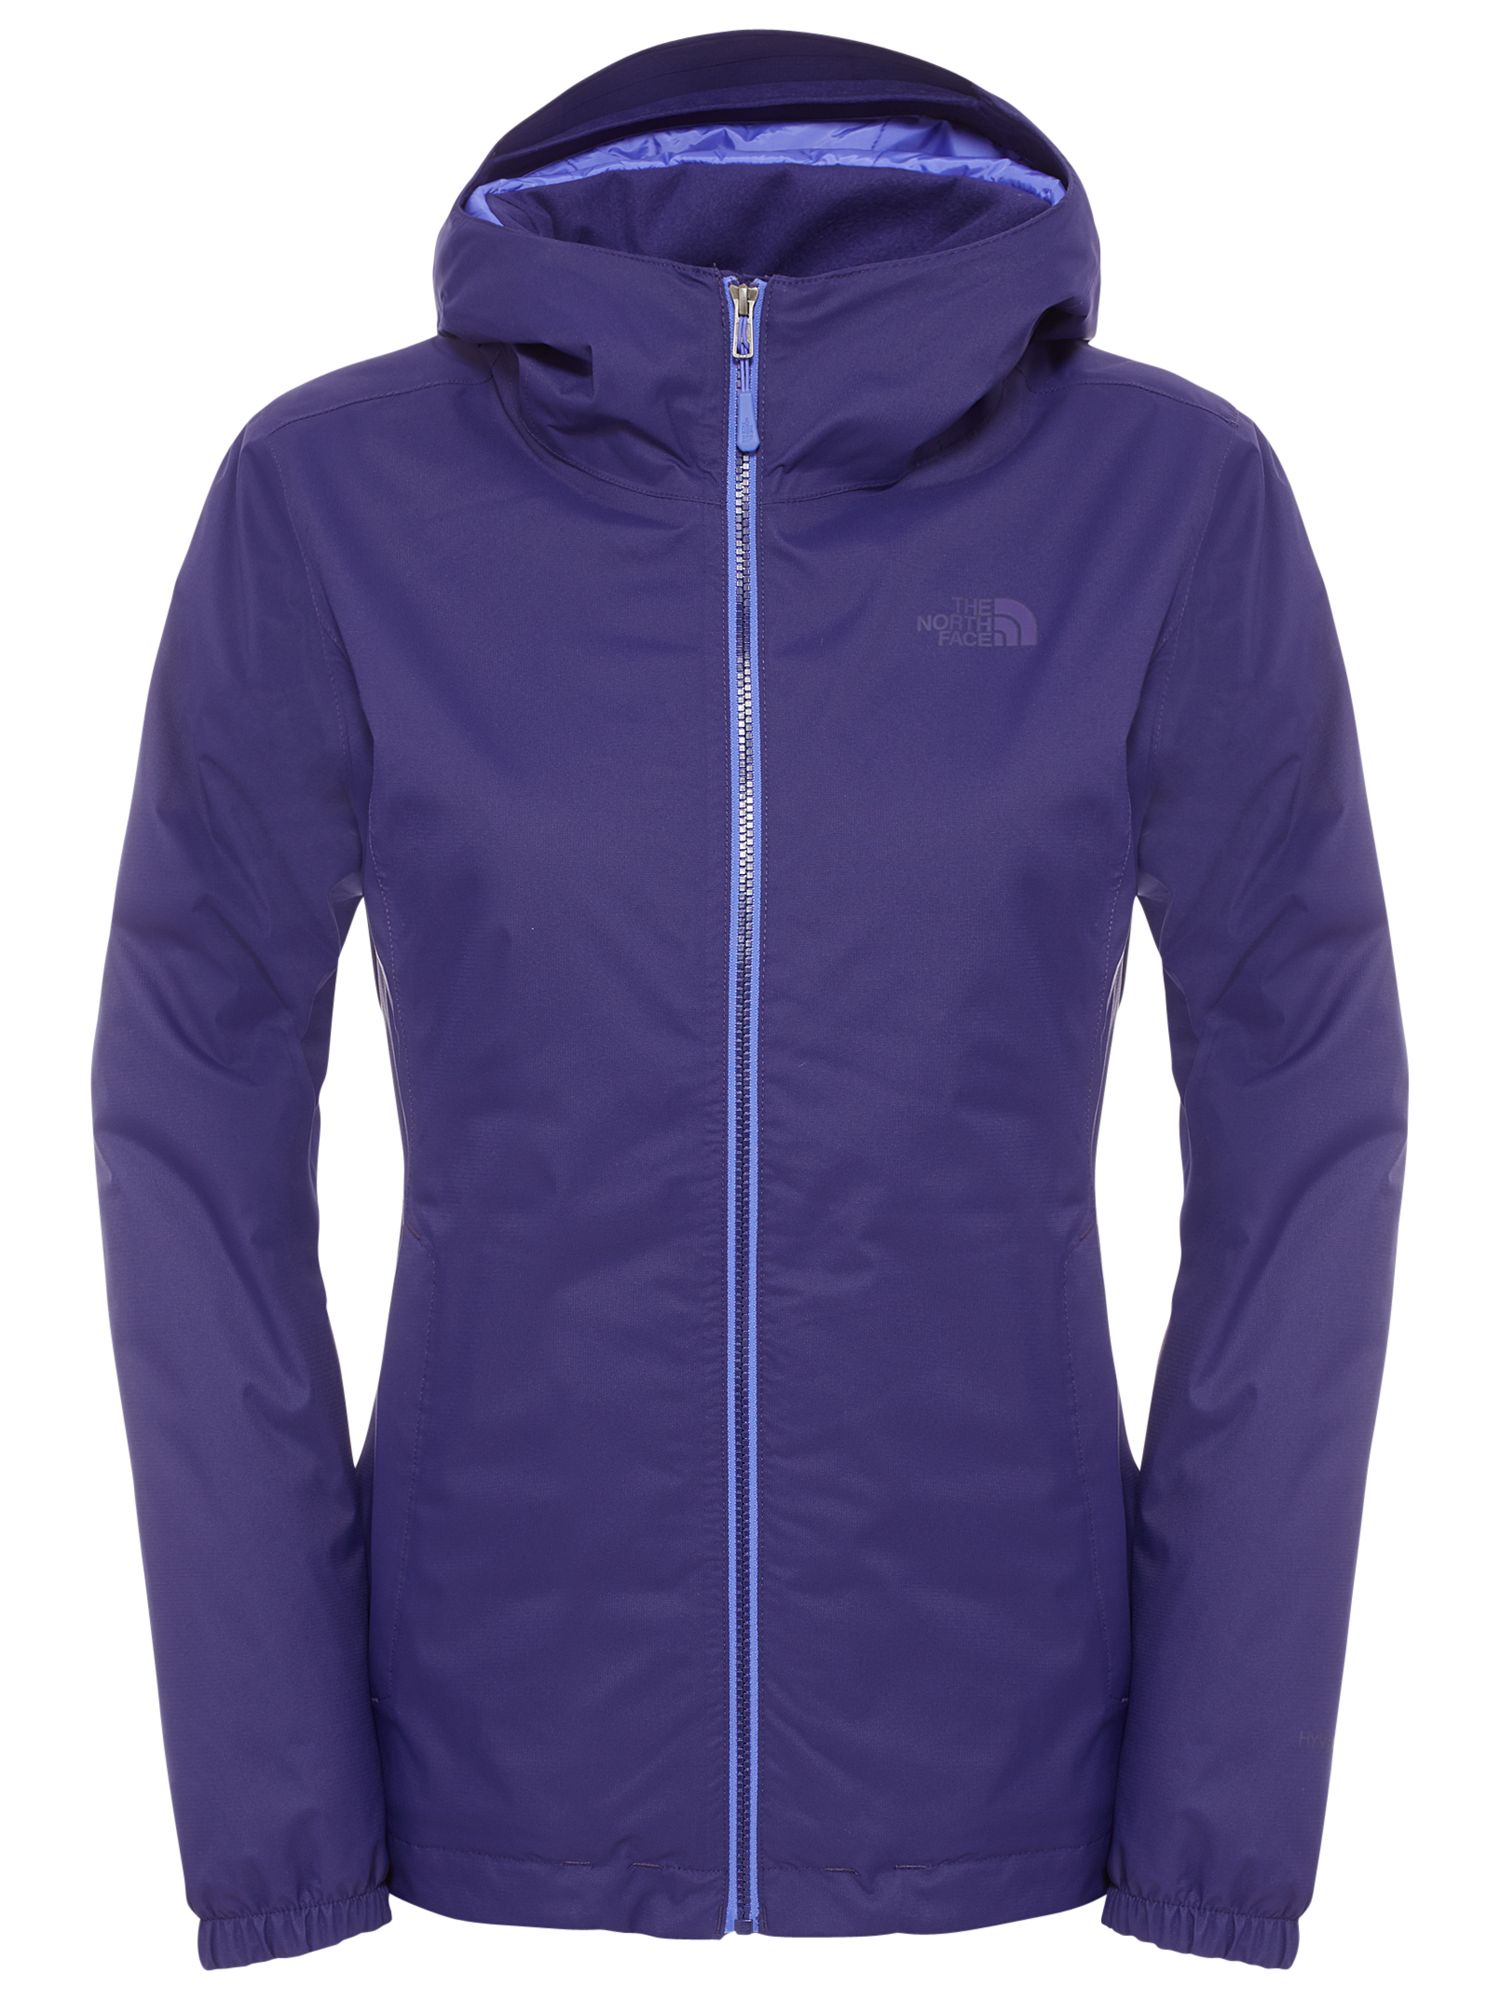 The North Face Quest Insulated Women S Waterproof Jacket Purple